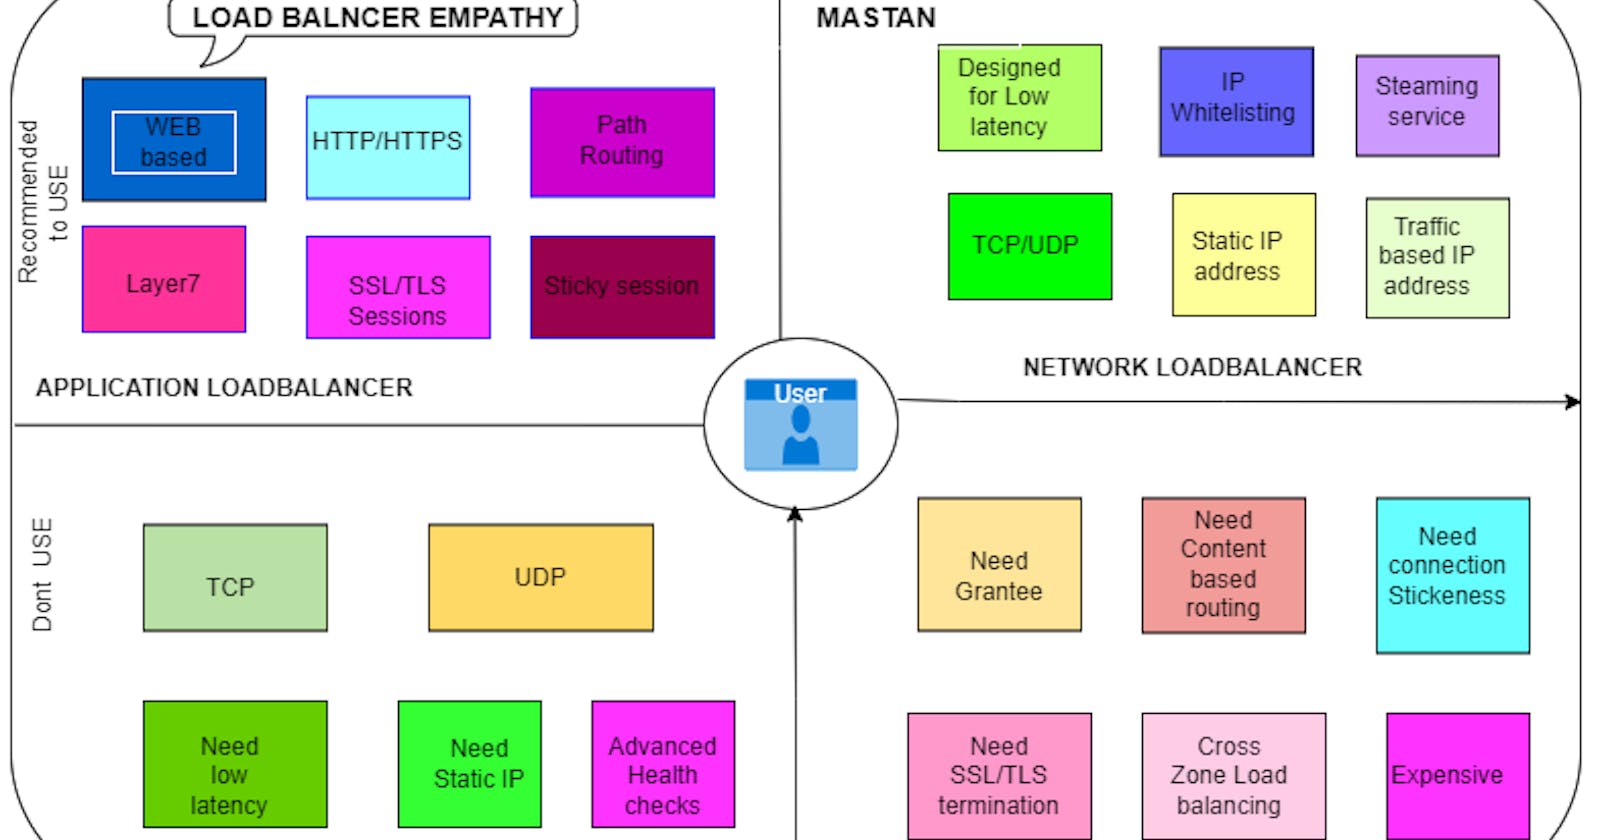 Load Balancing with Empathy: A Simplified Explanation